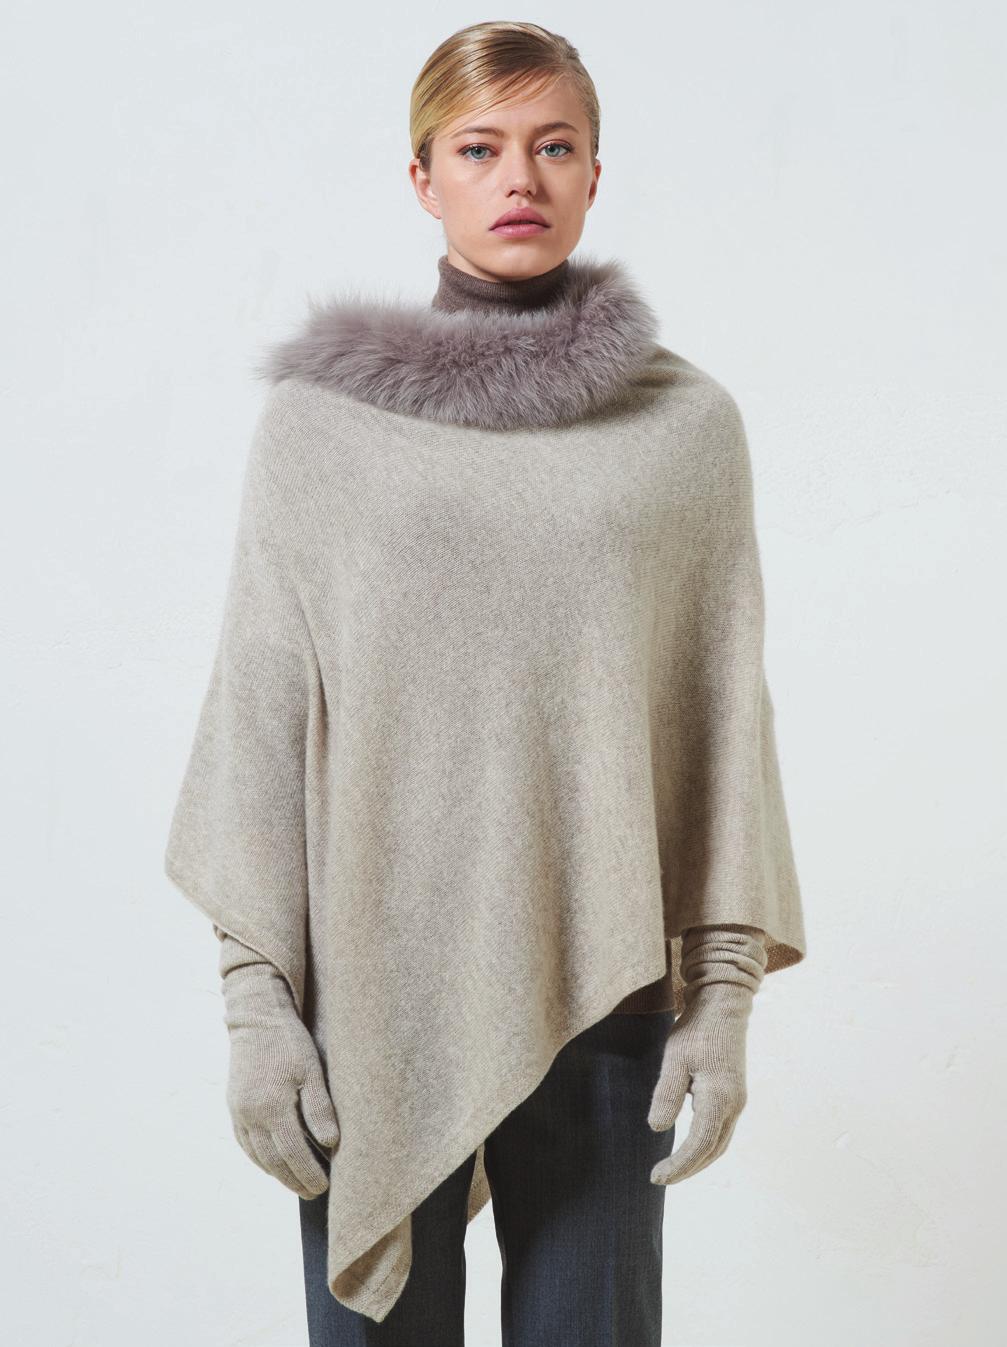 Knitwear The Knit collection is made for those looking for